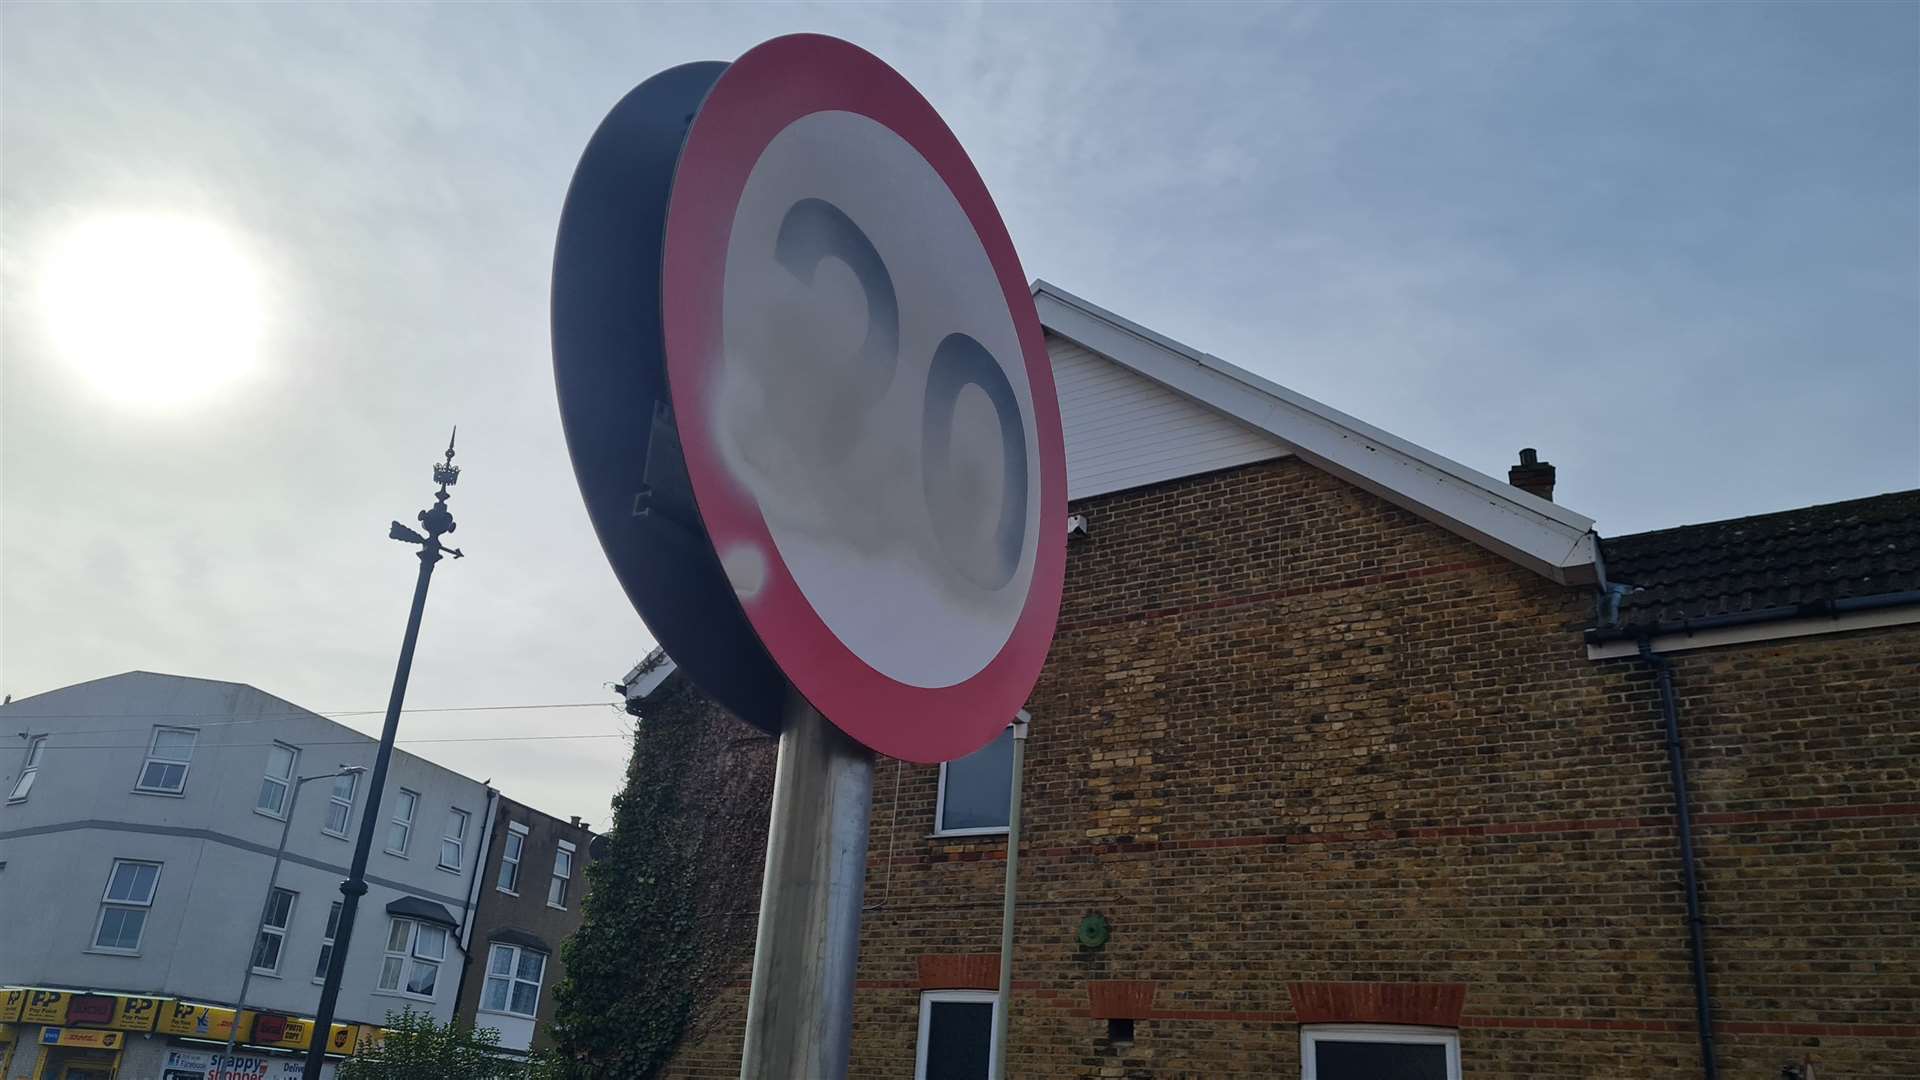 The new 20mph zone in Herne Bay has faced opposition